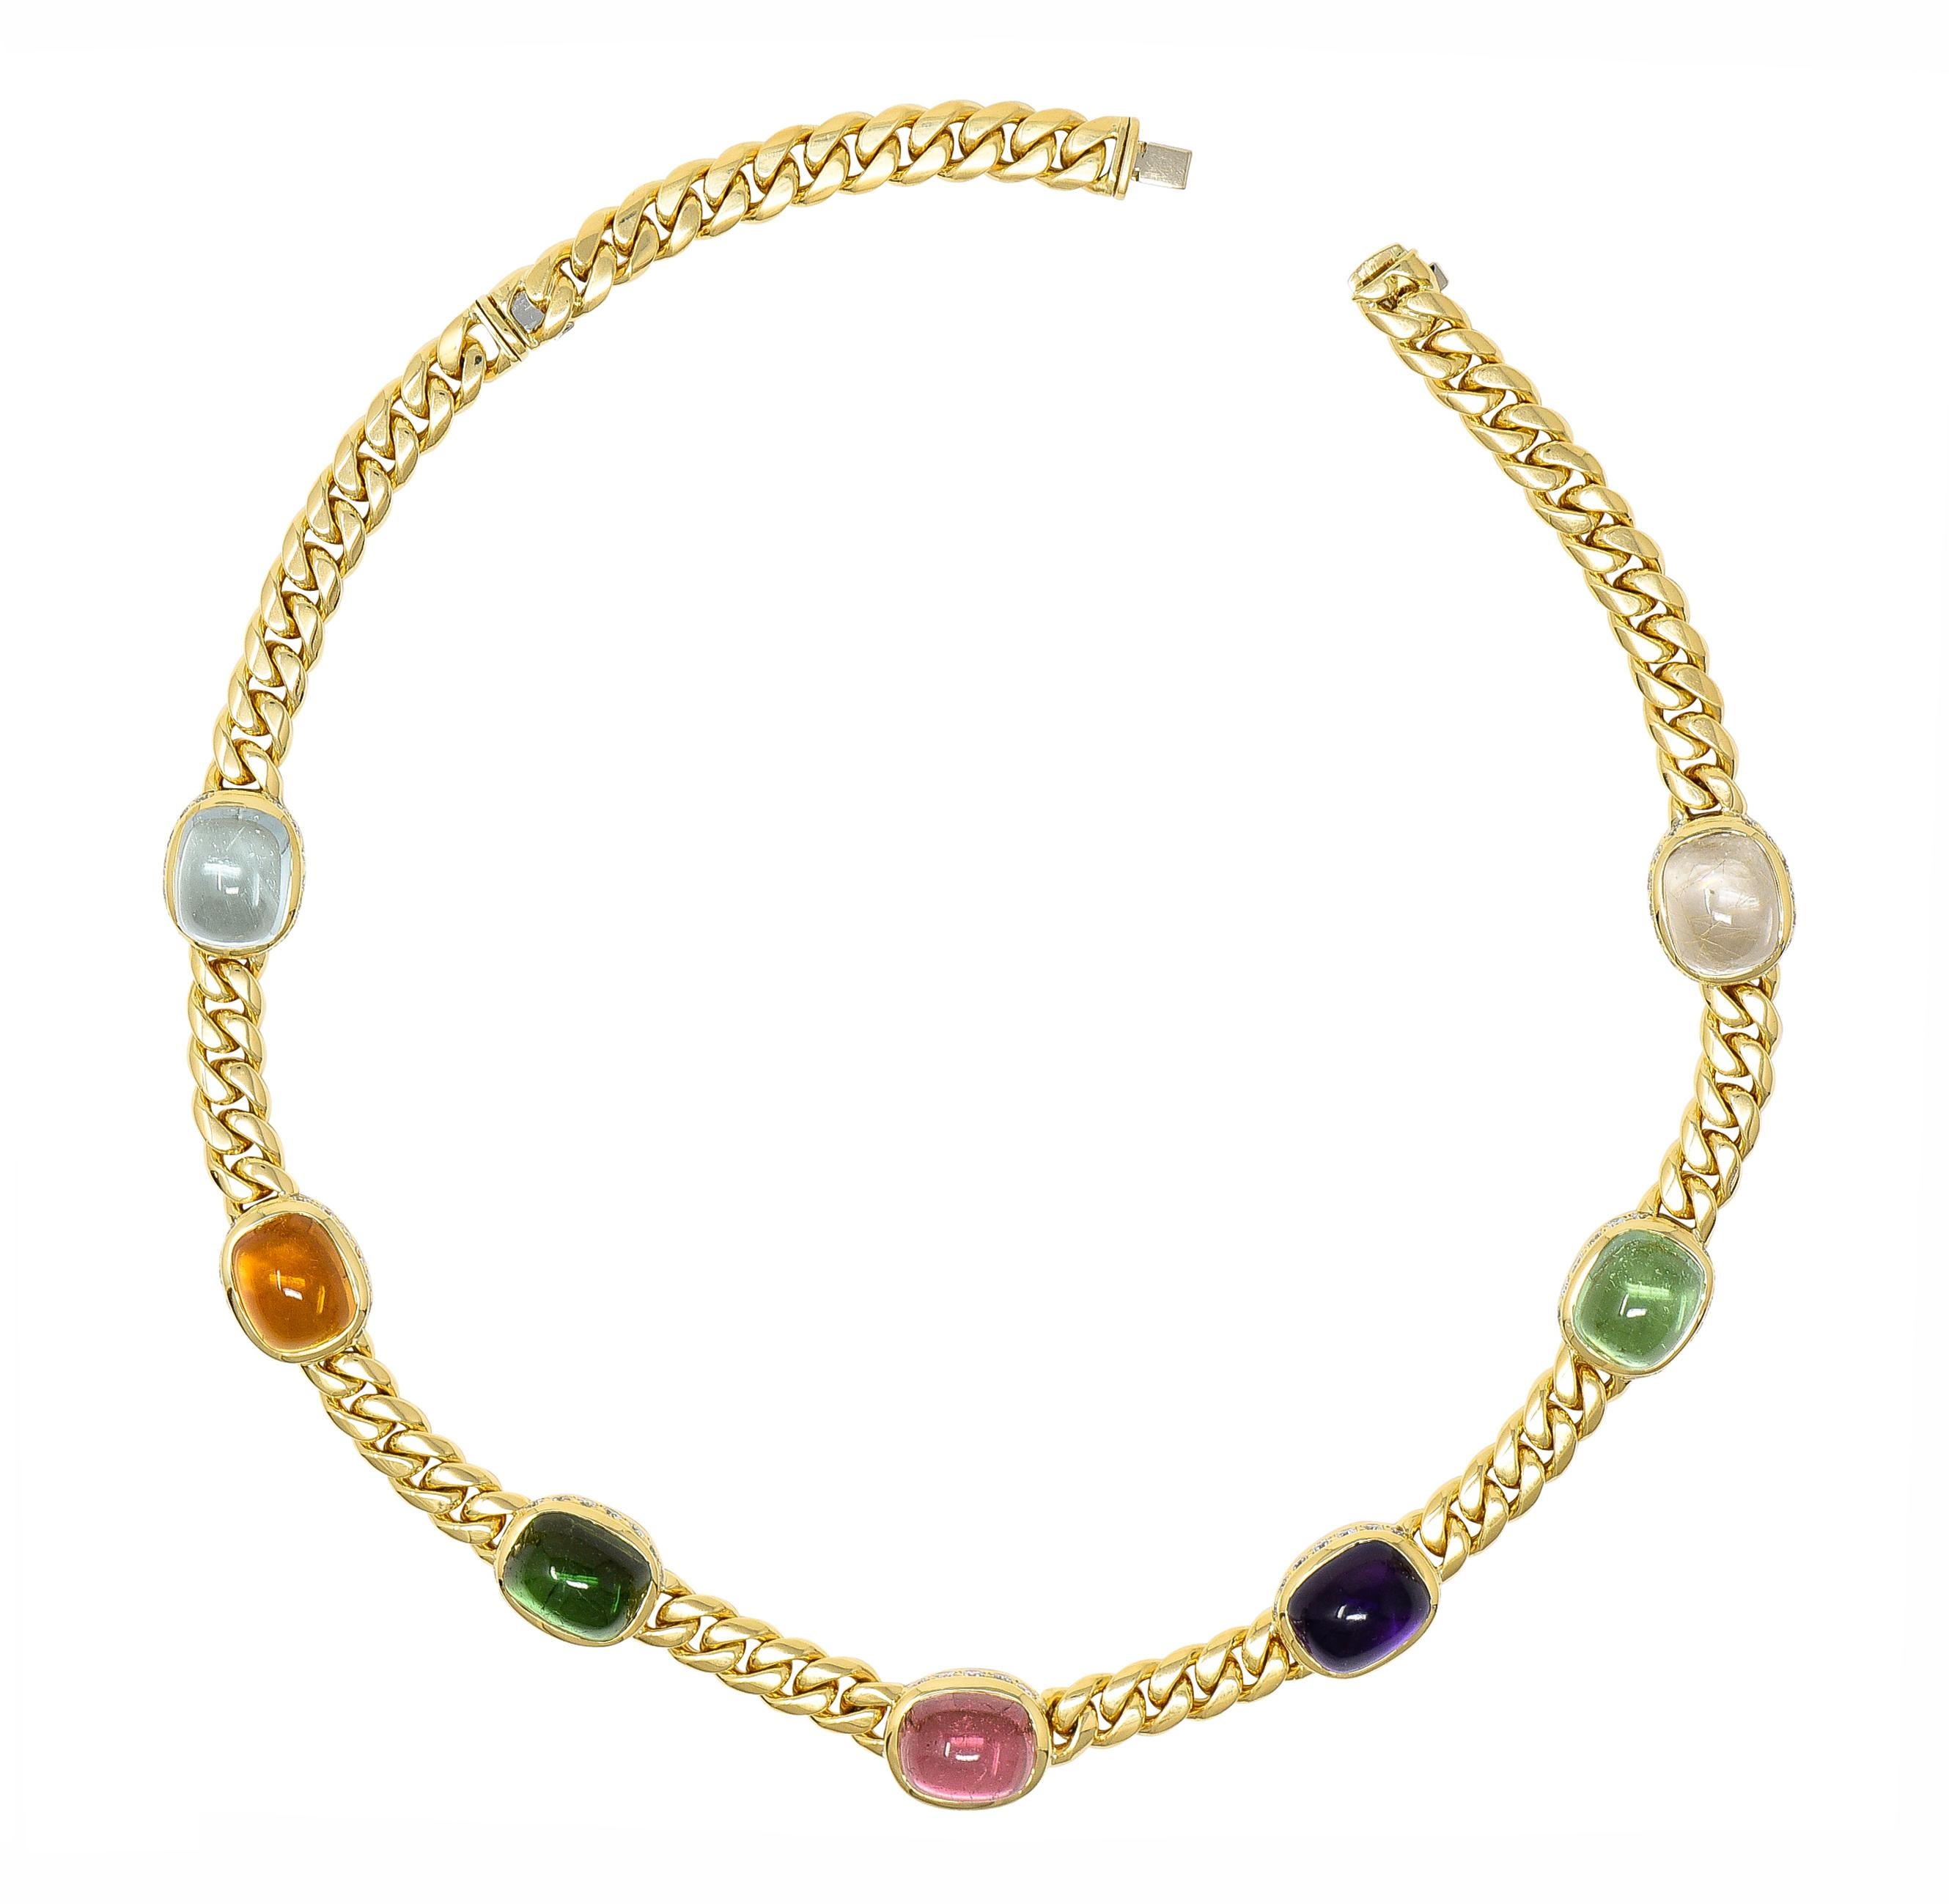 Designed as curb link chain featuring seven stations featuring cushion shaped cabochons measuring 11.0 x 13.0 mm. Consisting of amethyst, citrine, aquamarine, pink tourmaline, green tourmaline, and rutilated quartz. Transparent medium purple,